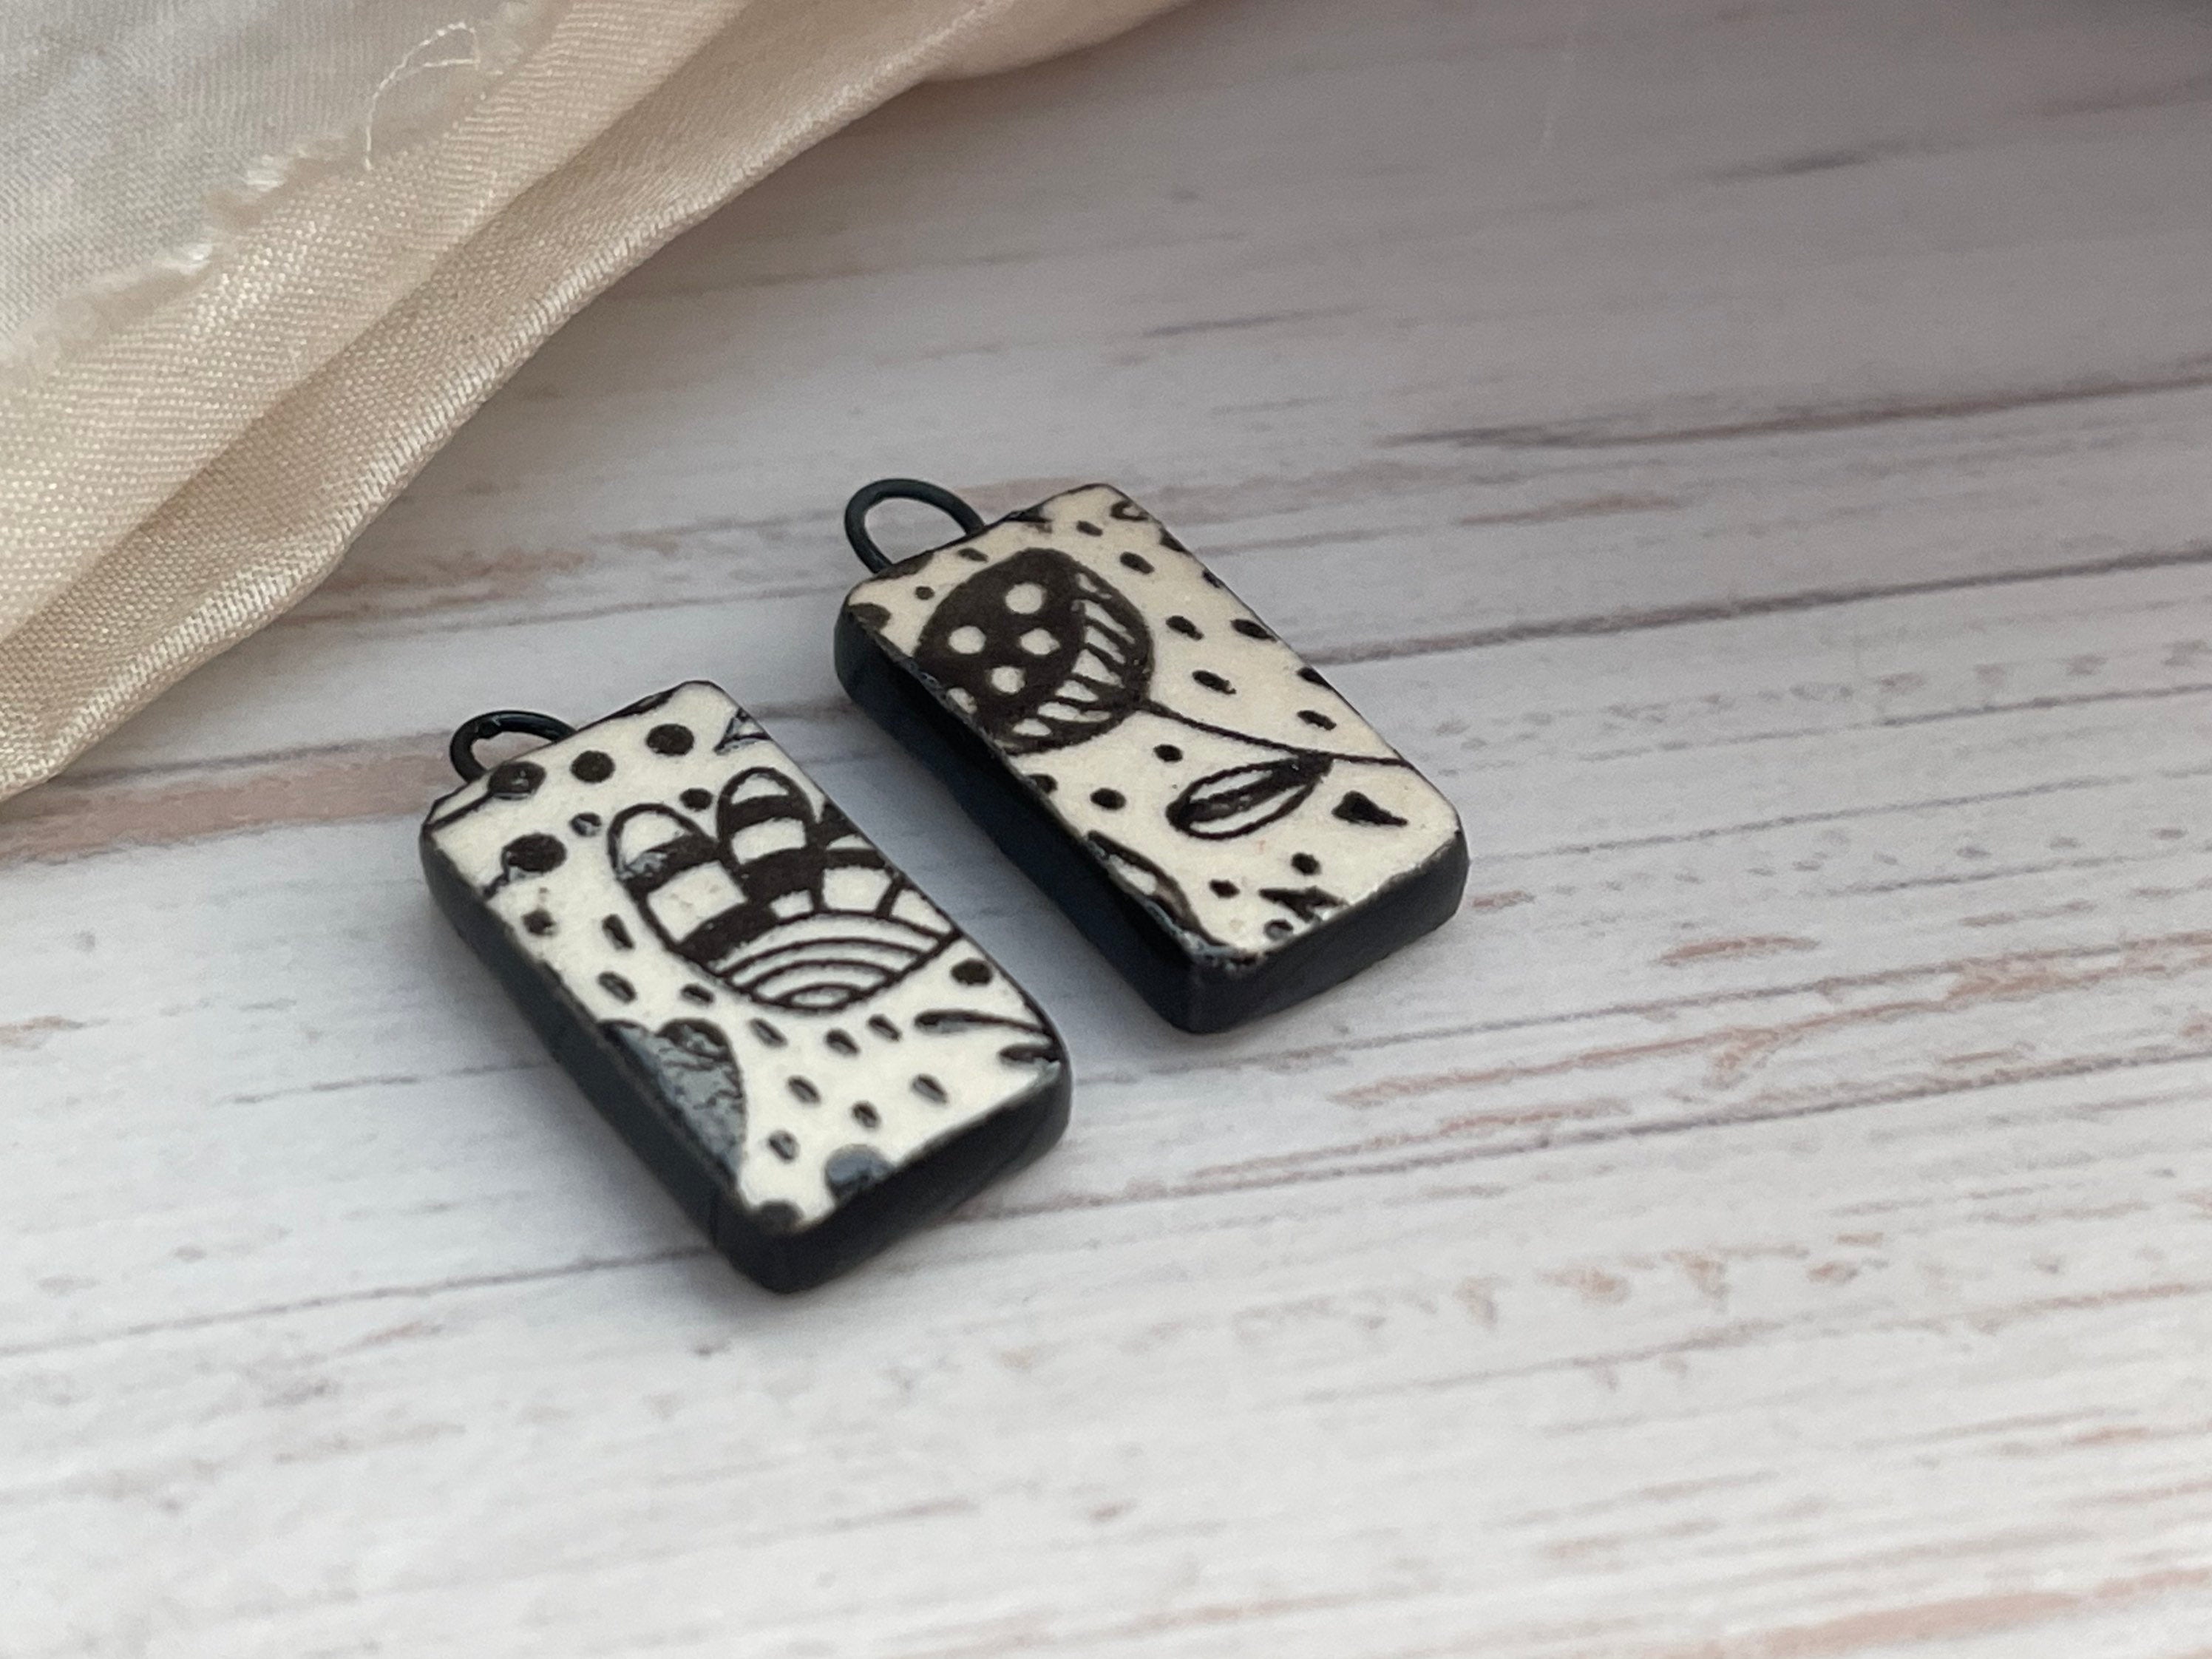 Black Earring Bead Pair, Porcelain Ceramic Charms, Jewelry Making Components, Beading Handmade